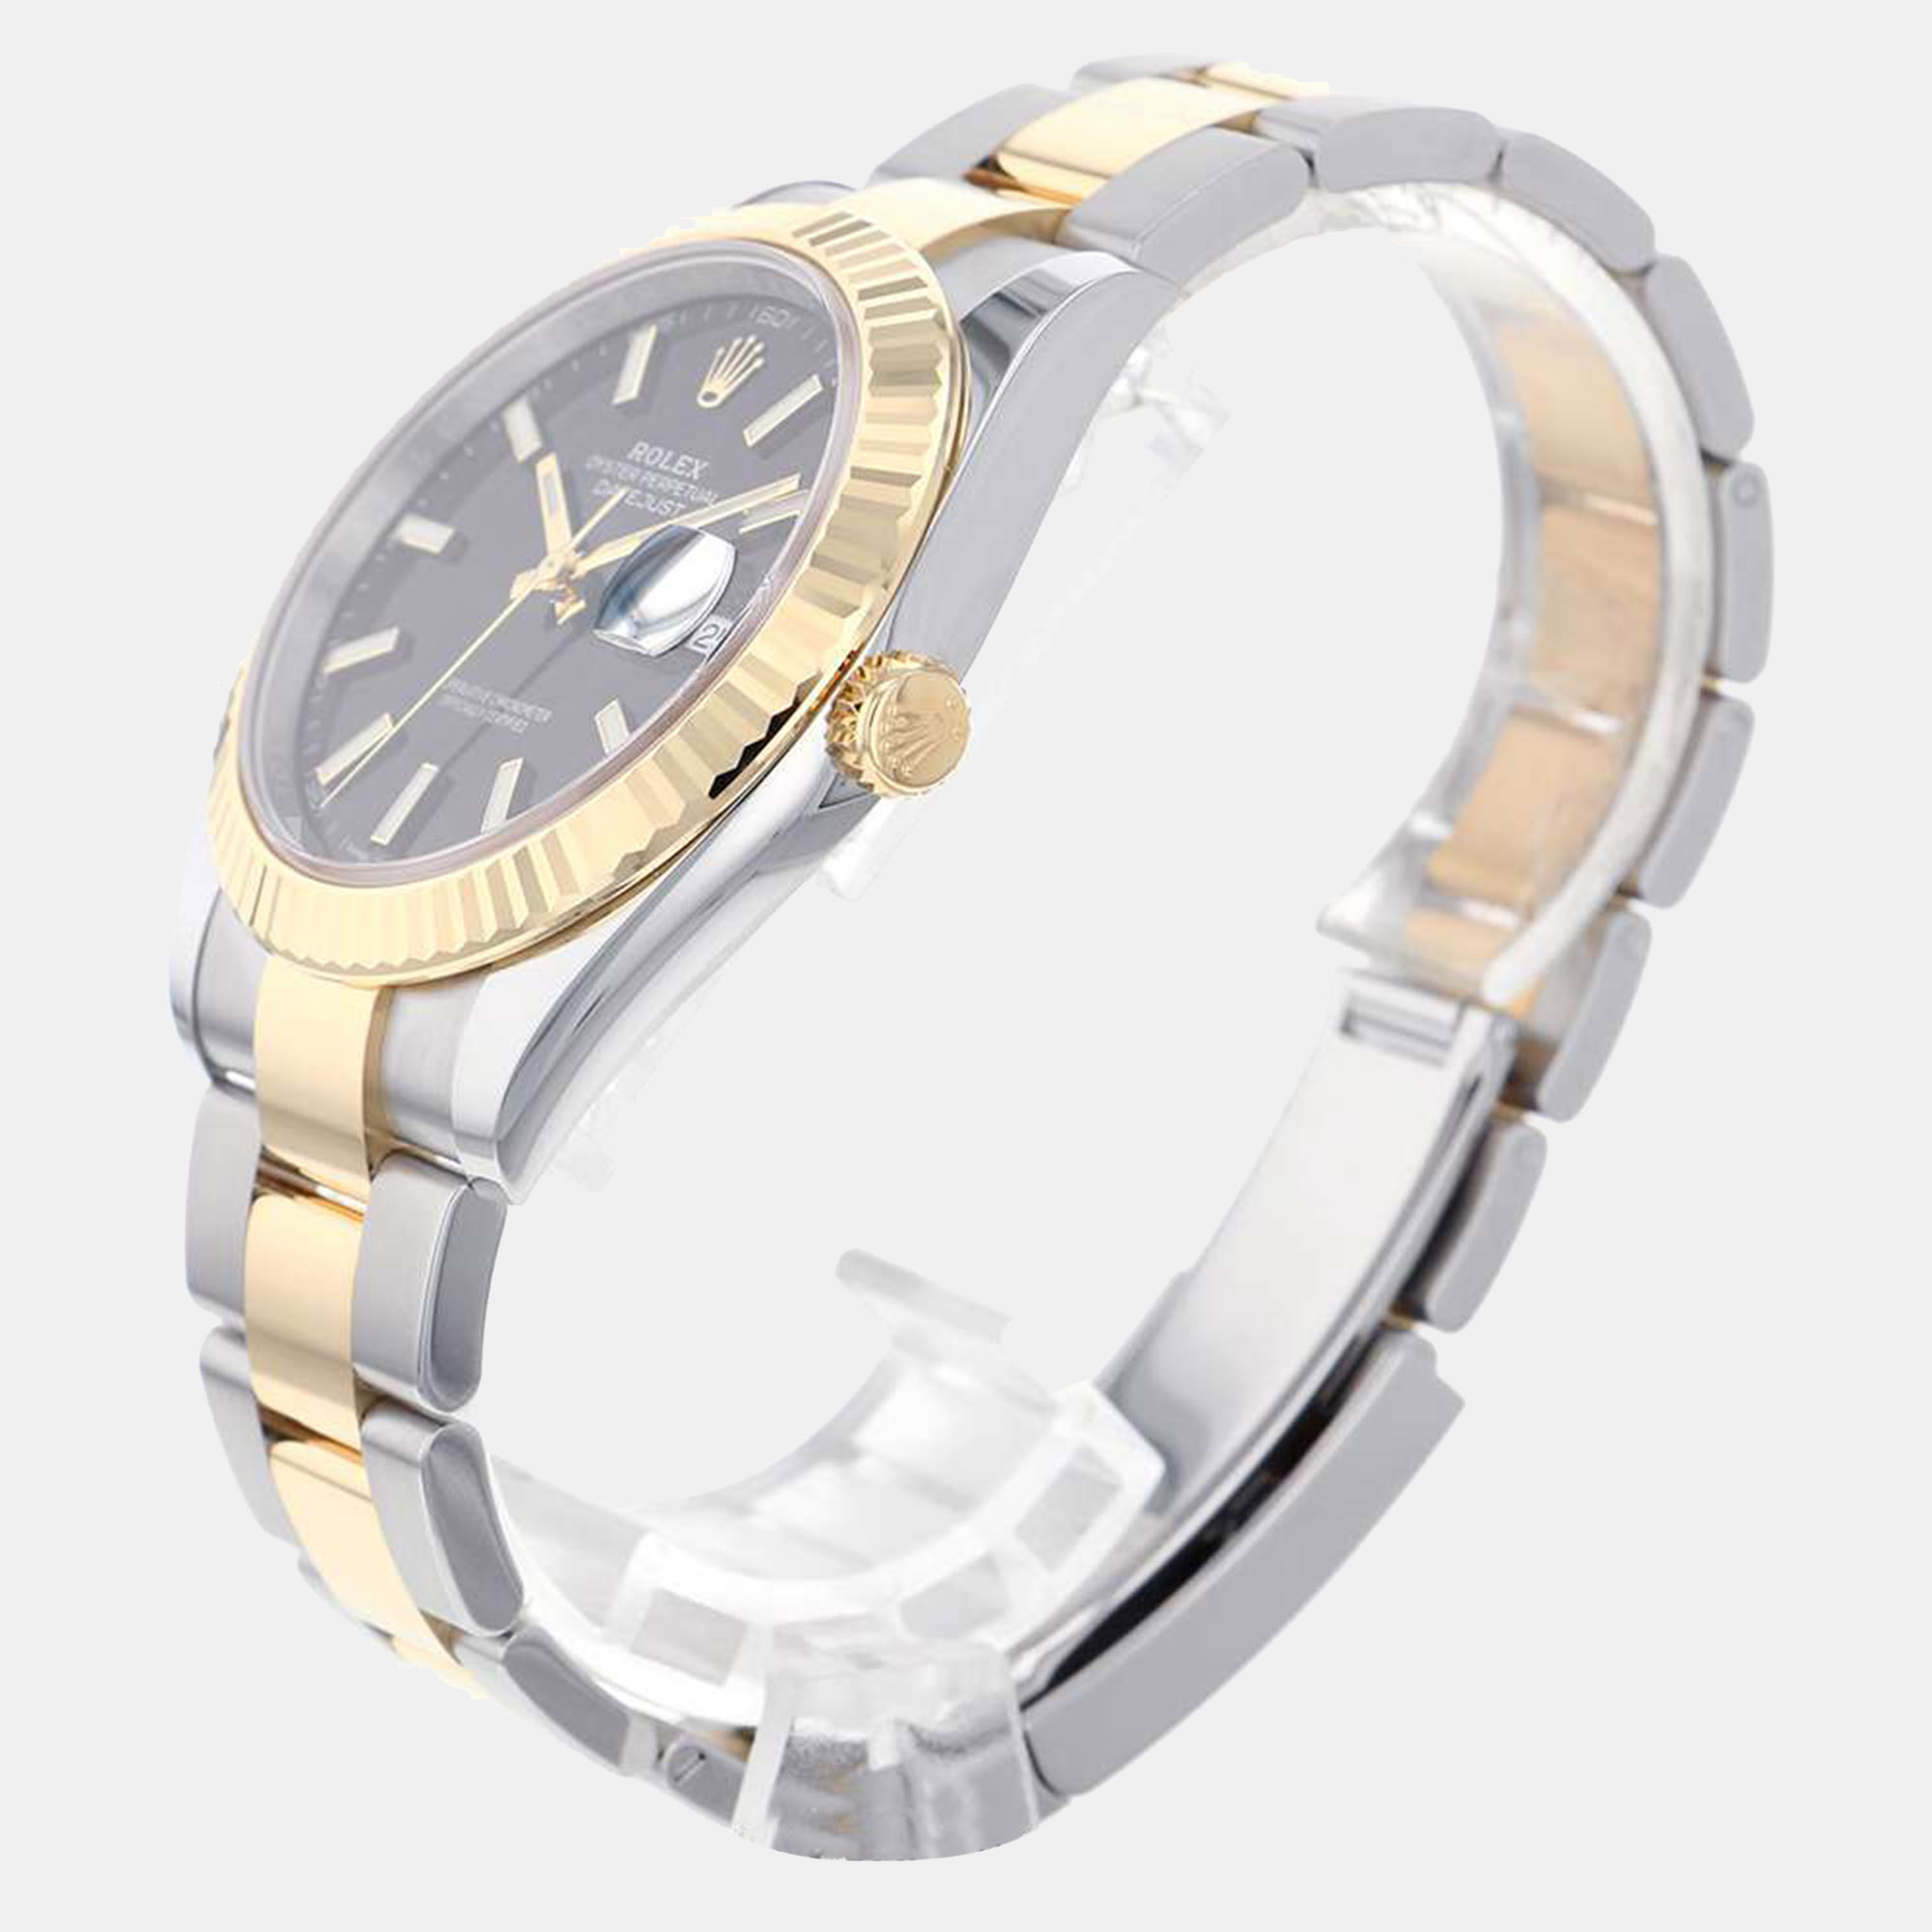 

Rolex Black 18k Yellow Gold And Stainless Steel Datejust 126333 Automatic Men's Wristwatch 41 mm